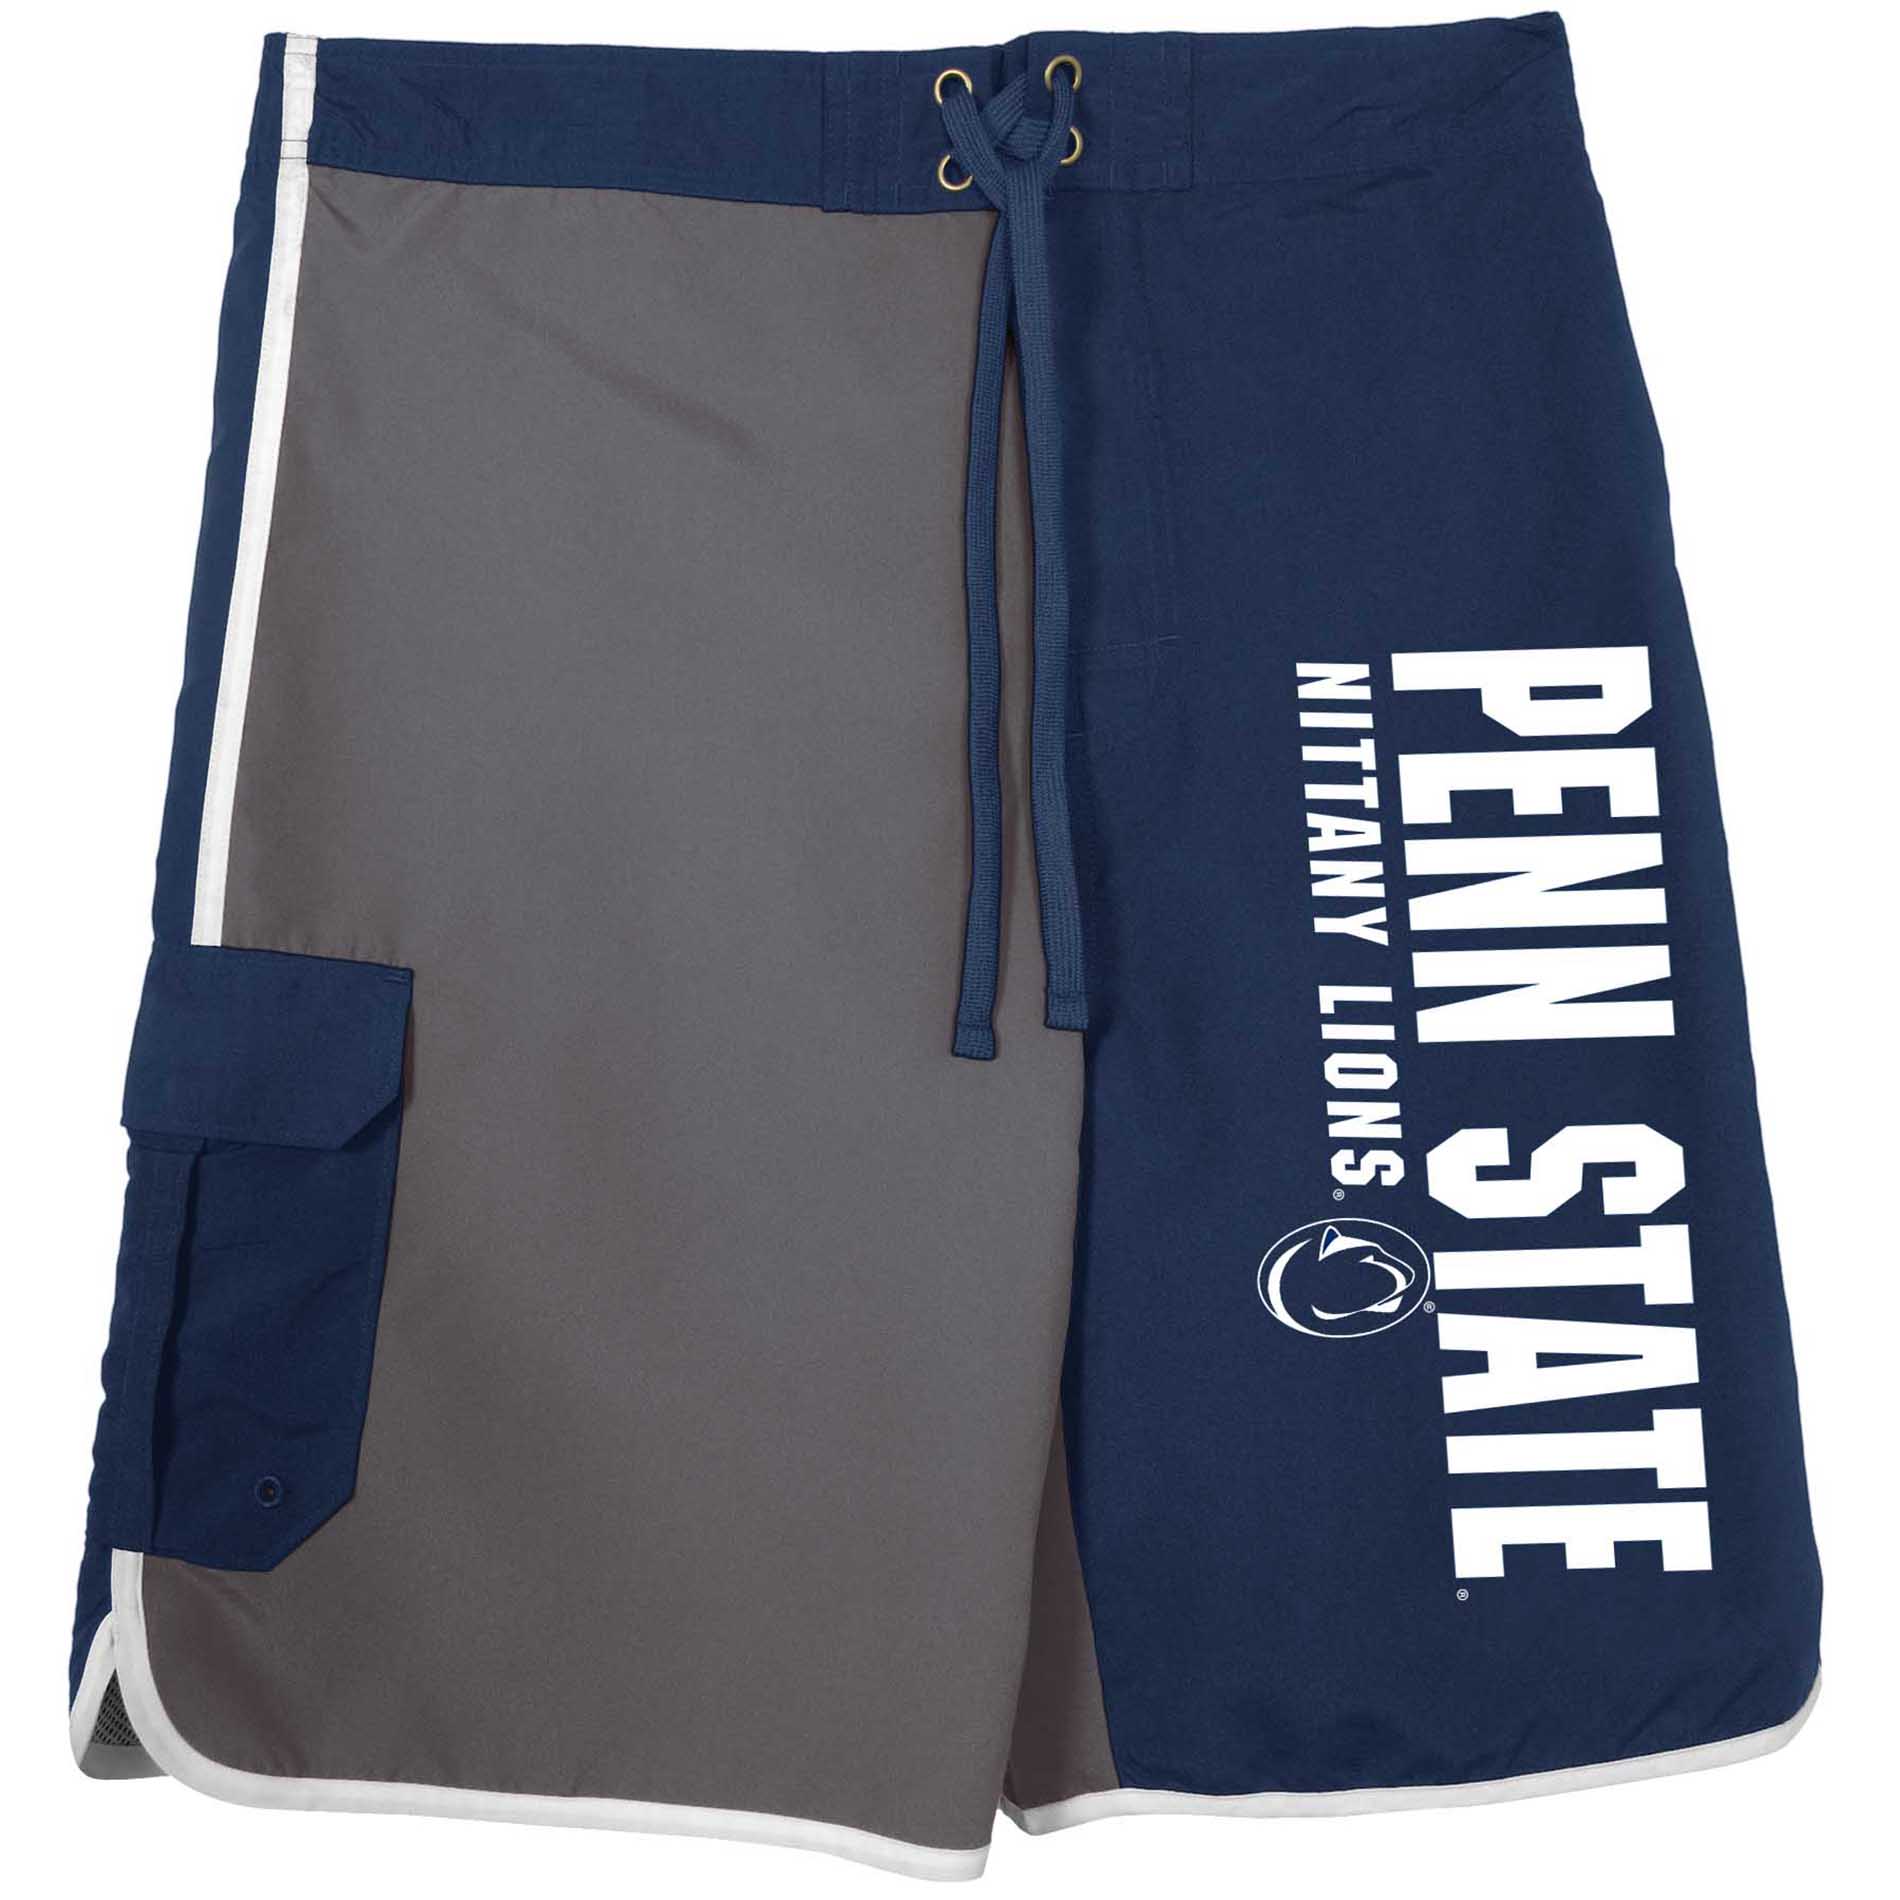 NCAA Men's Penn State Nittany Lions Board Shorts